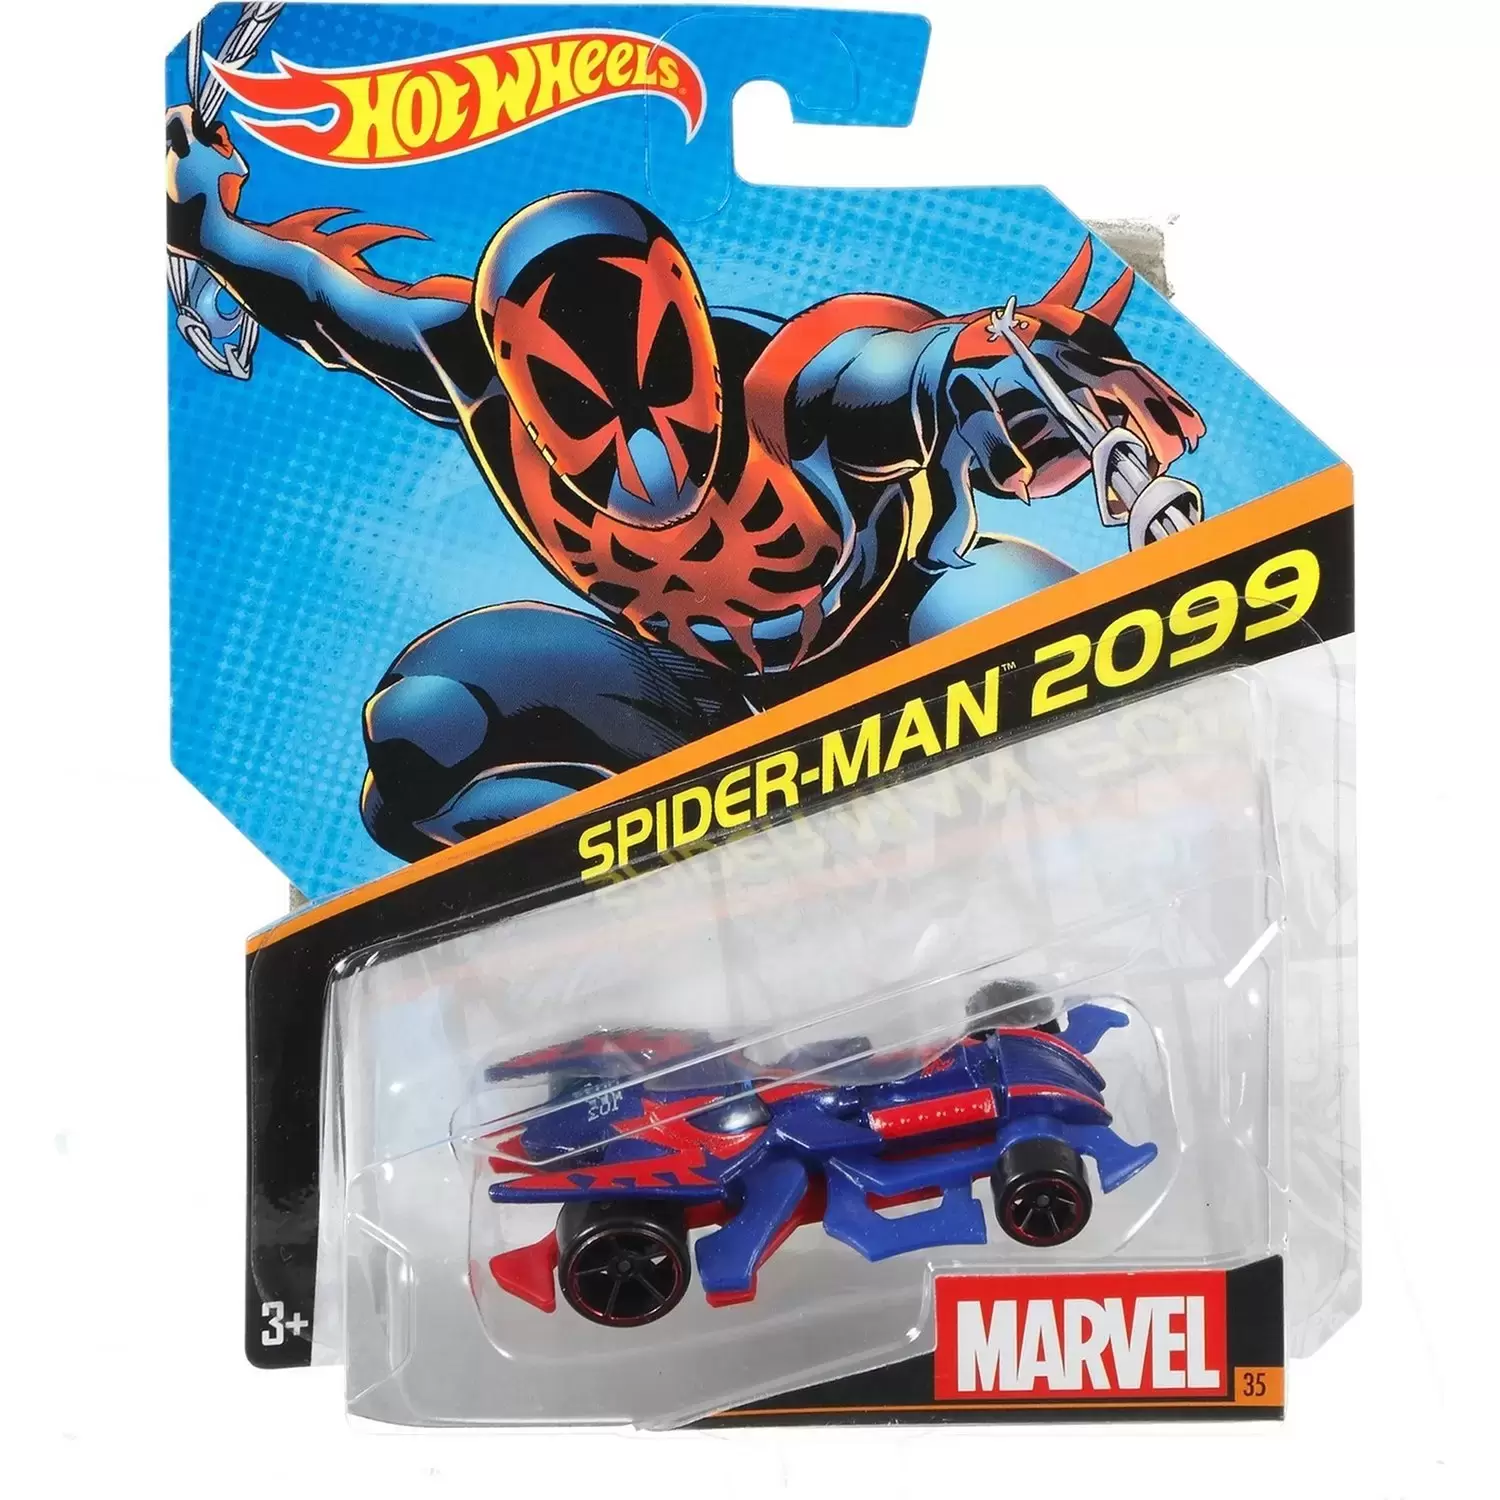 Marvel Character Cars - Spider-Man 2099